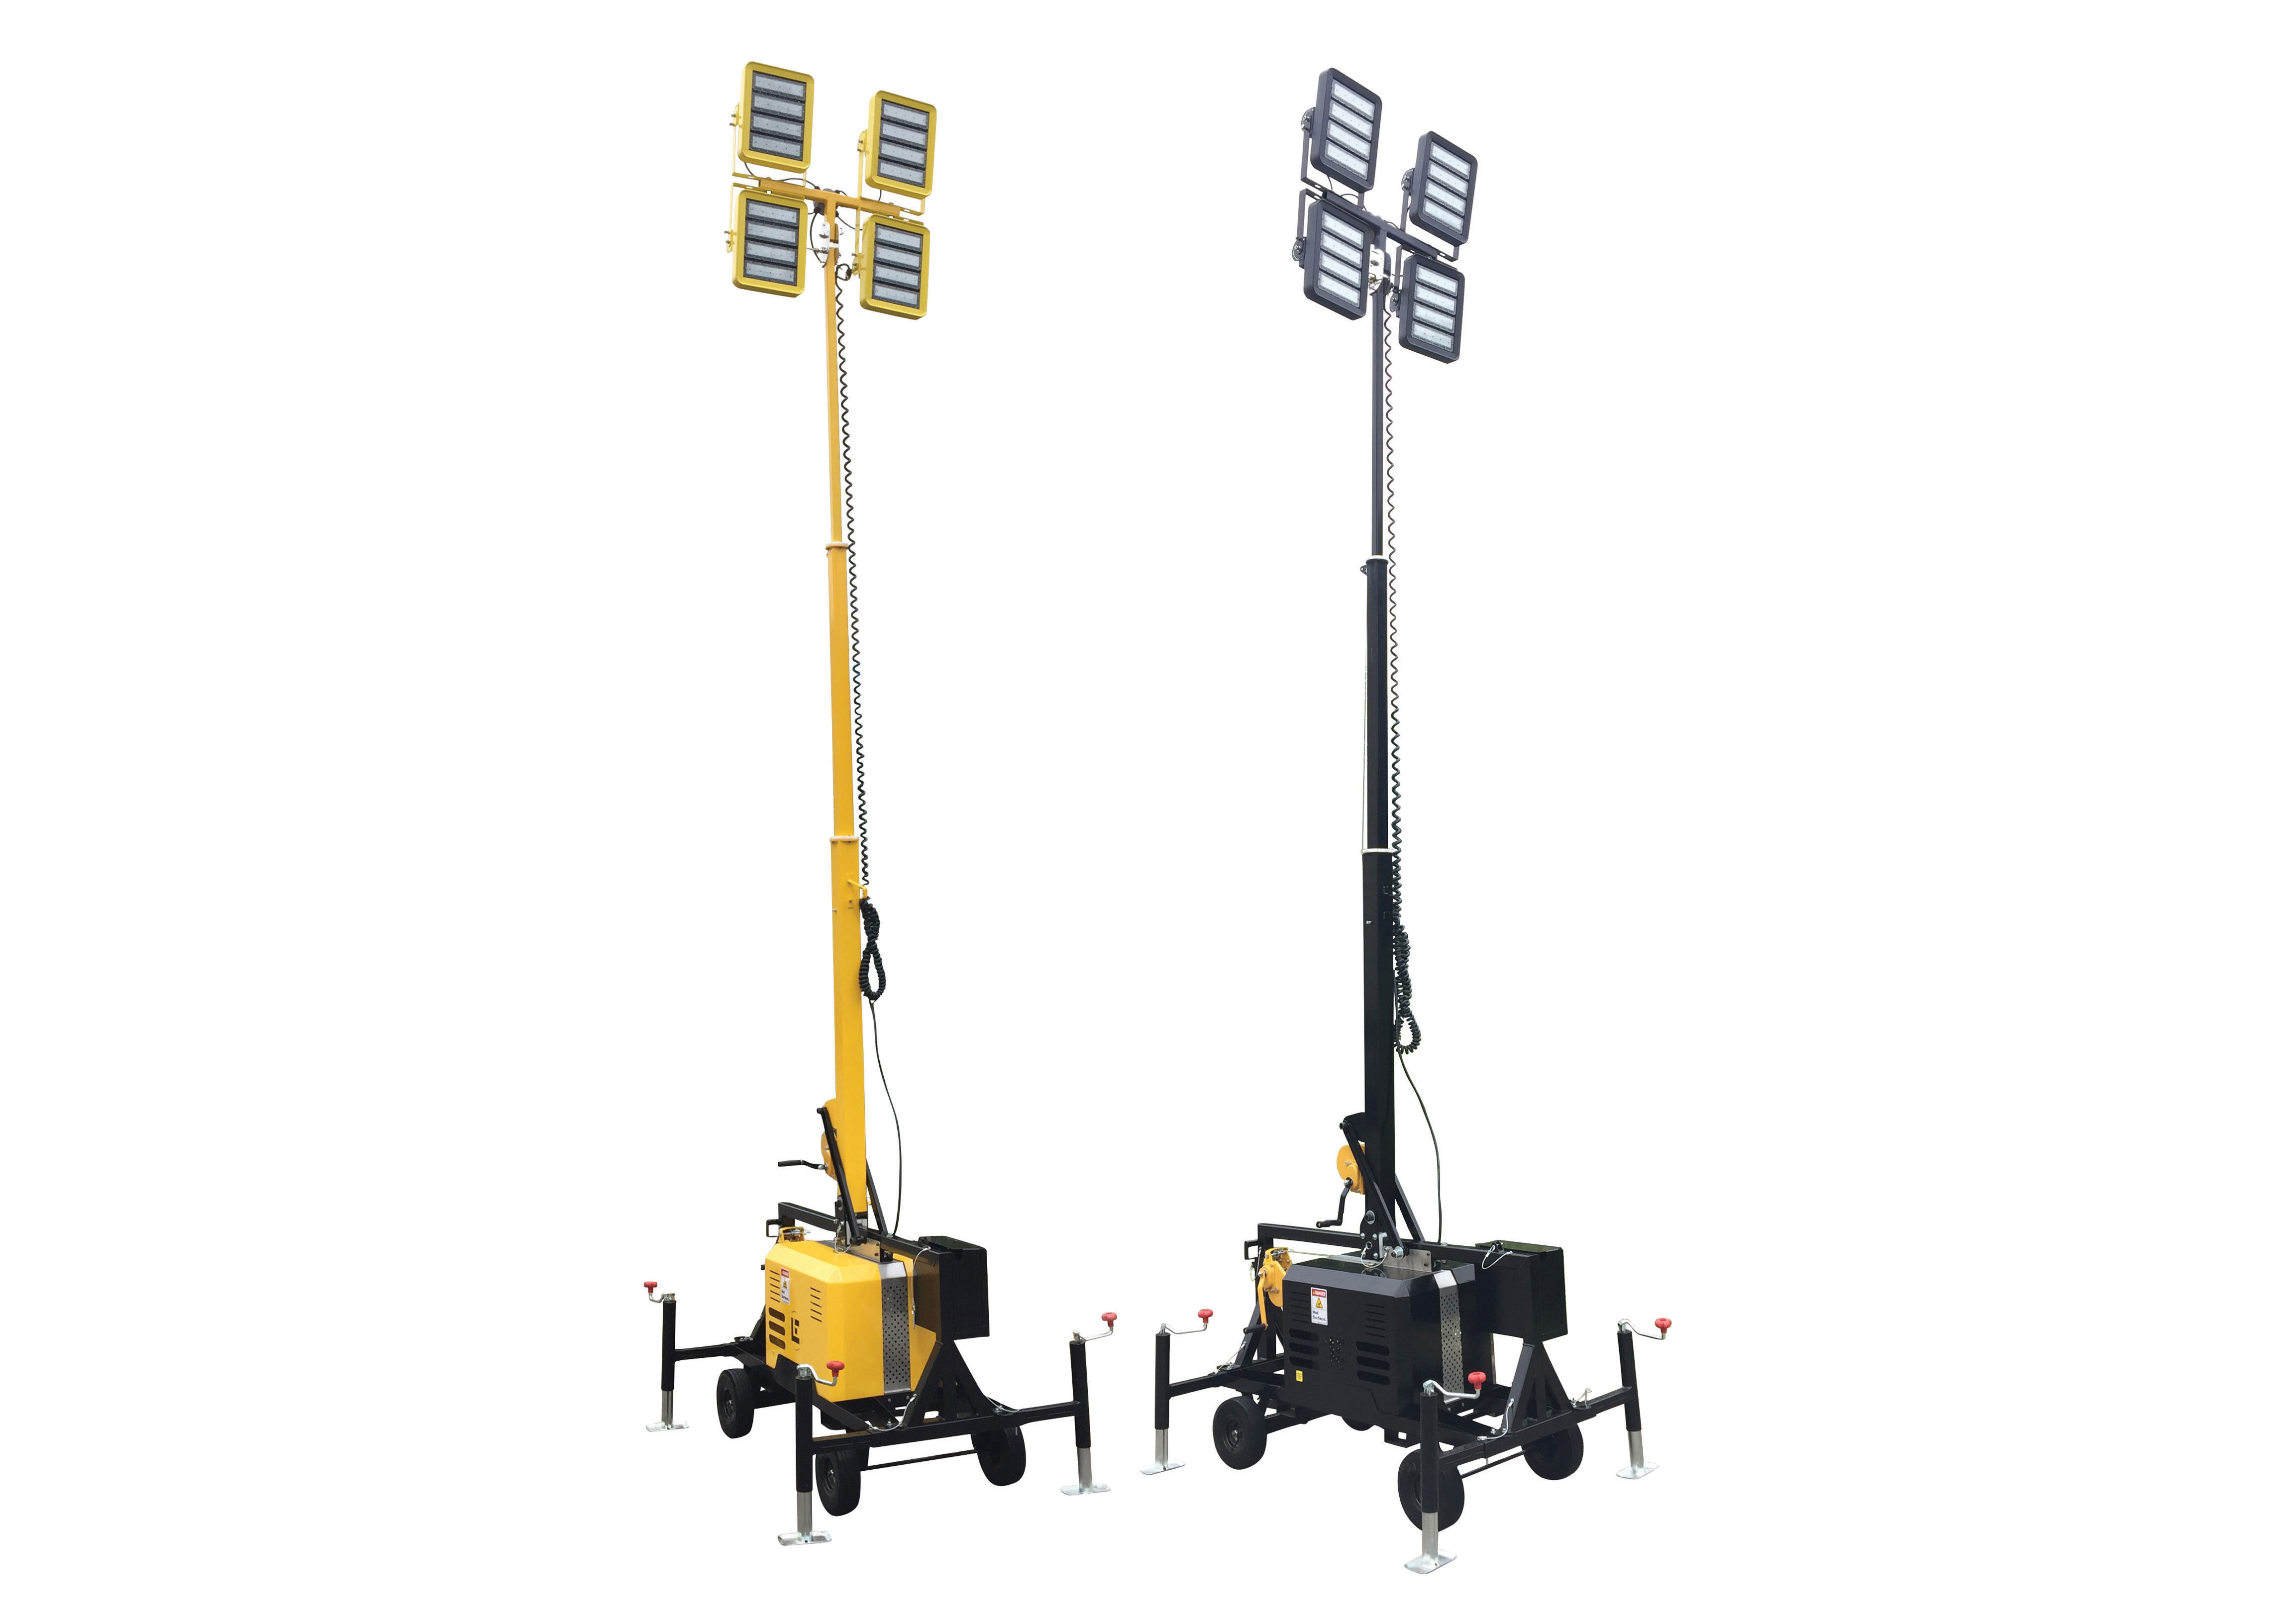 Lind Equipment's Beacon Portable LED Tower